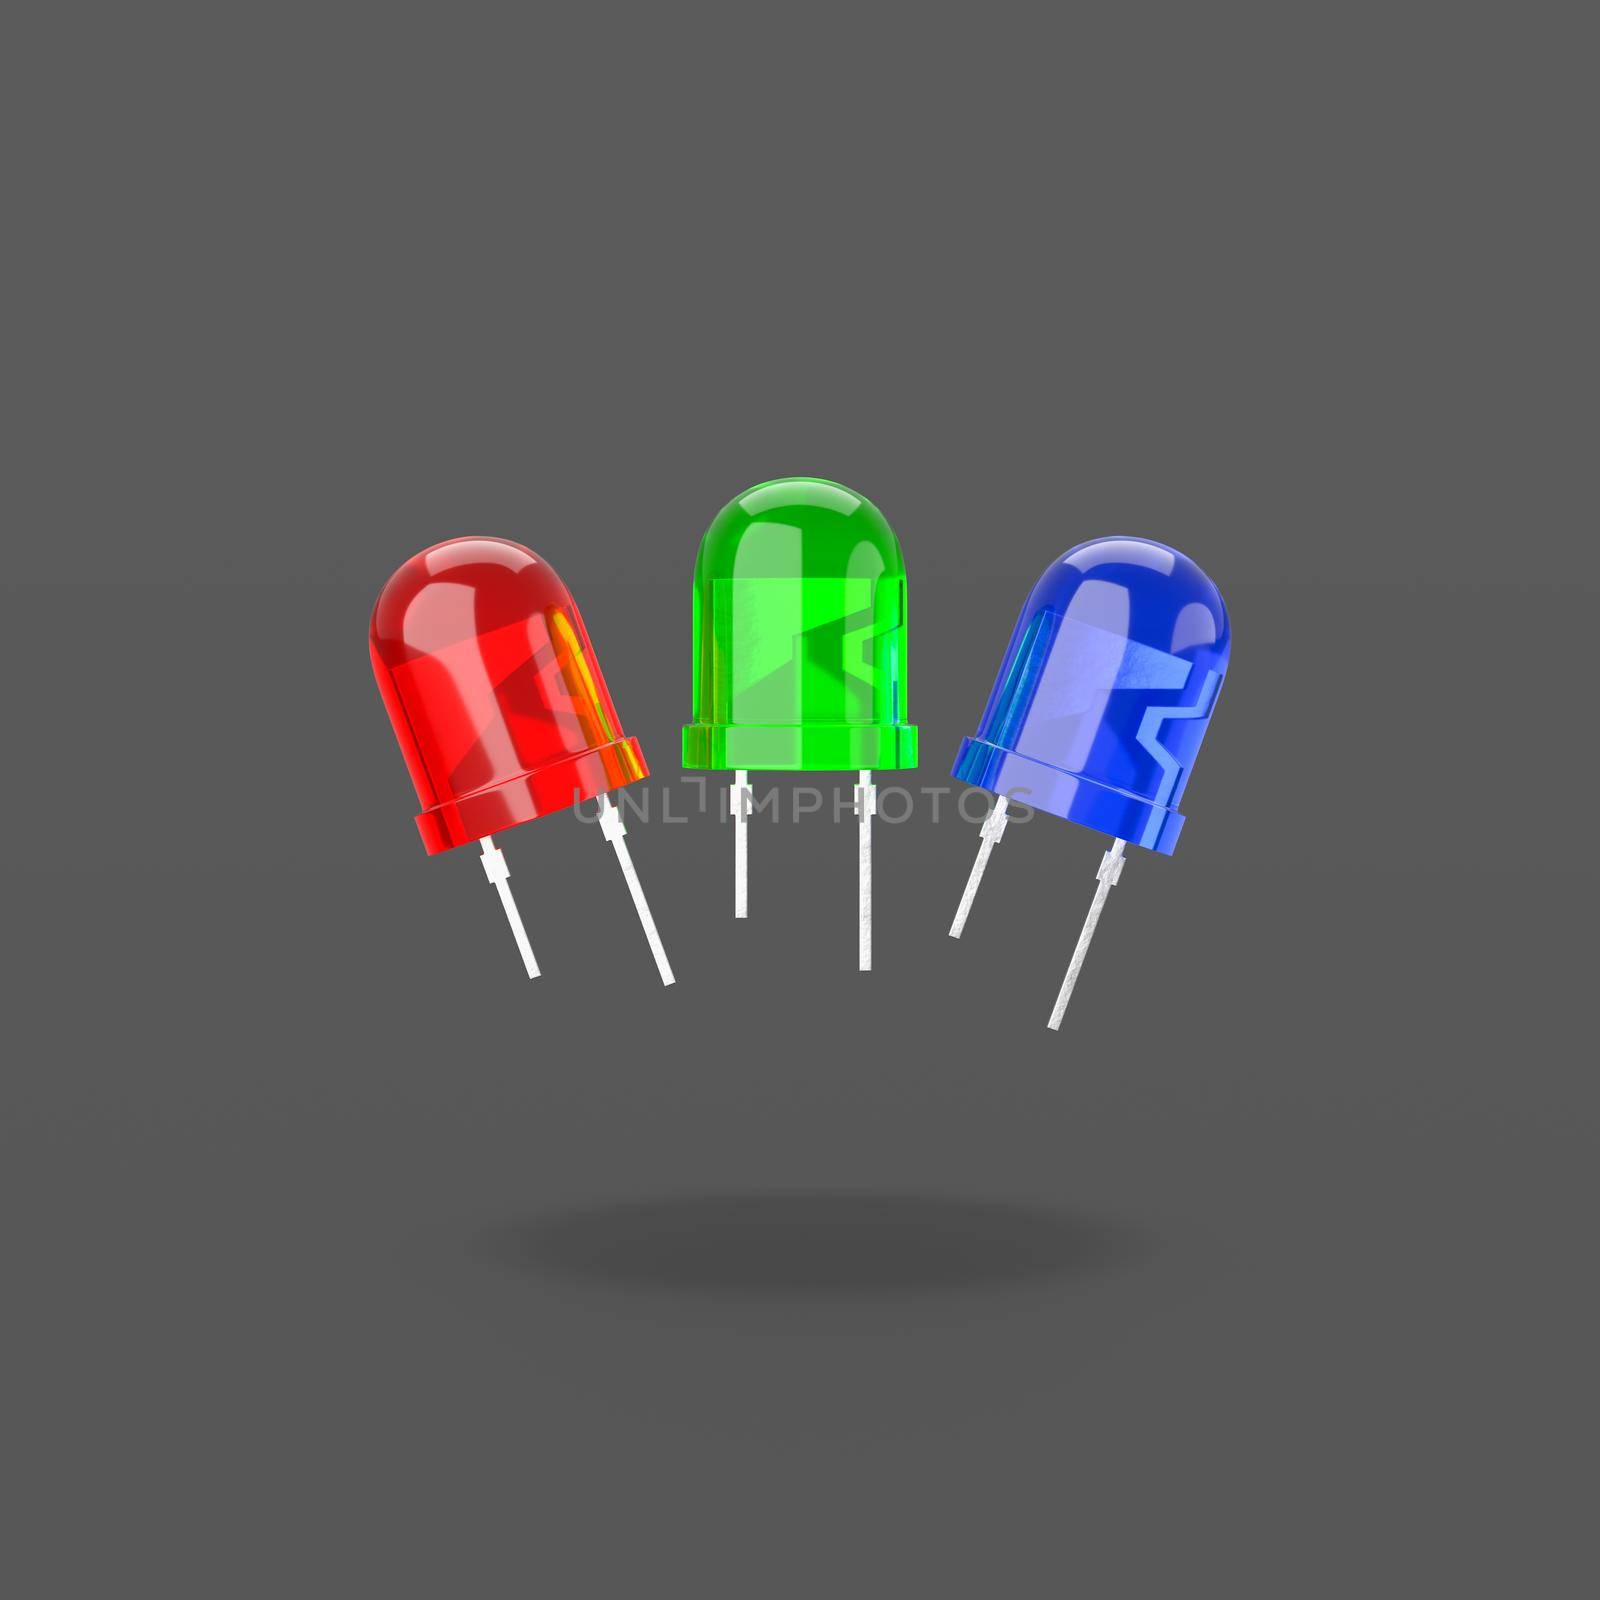 RGB Led Diodes on Black Background by make